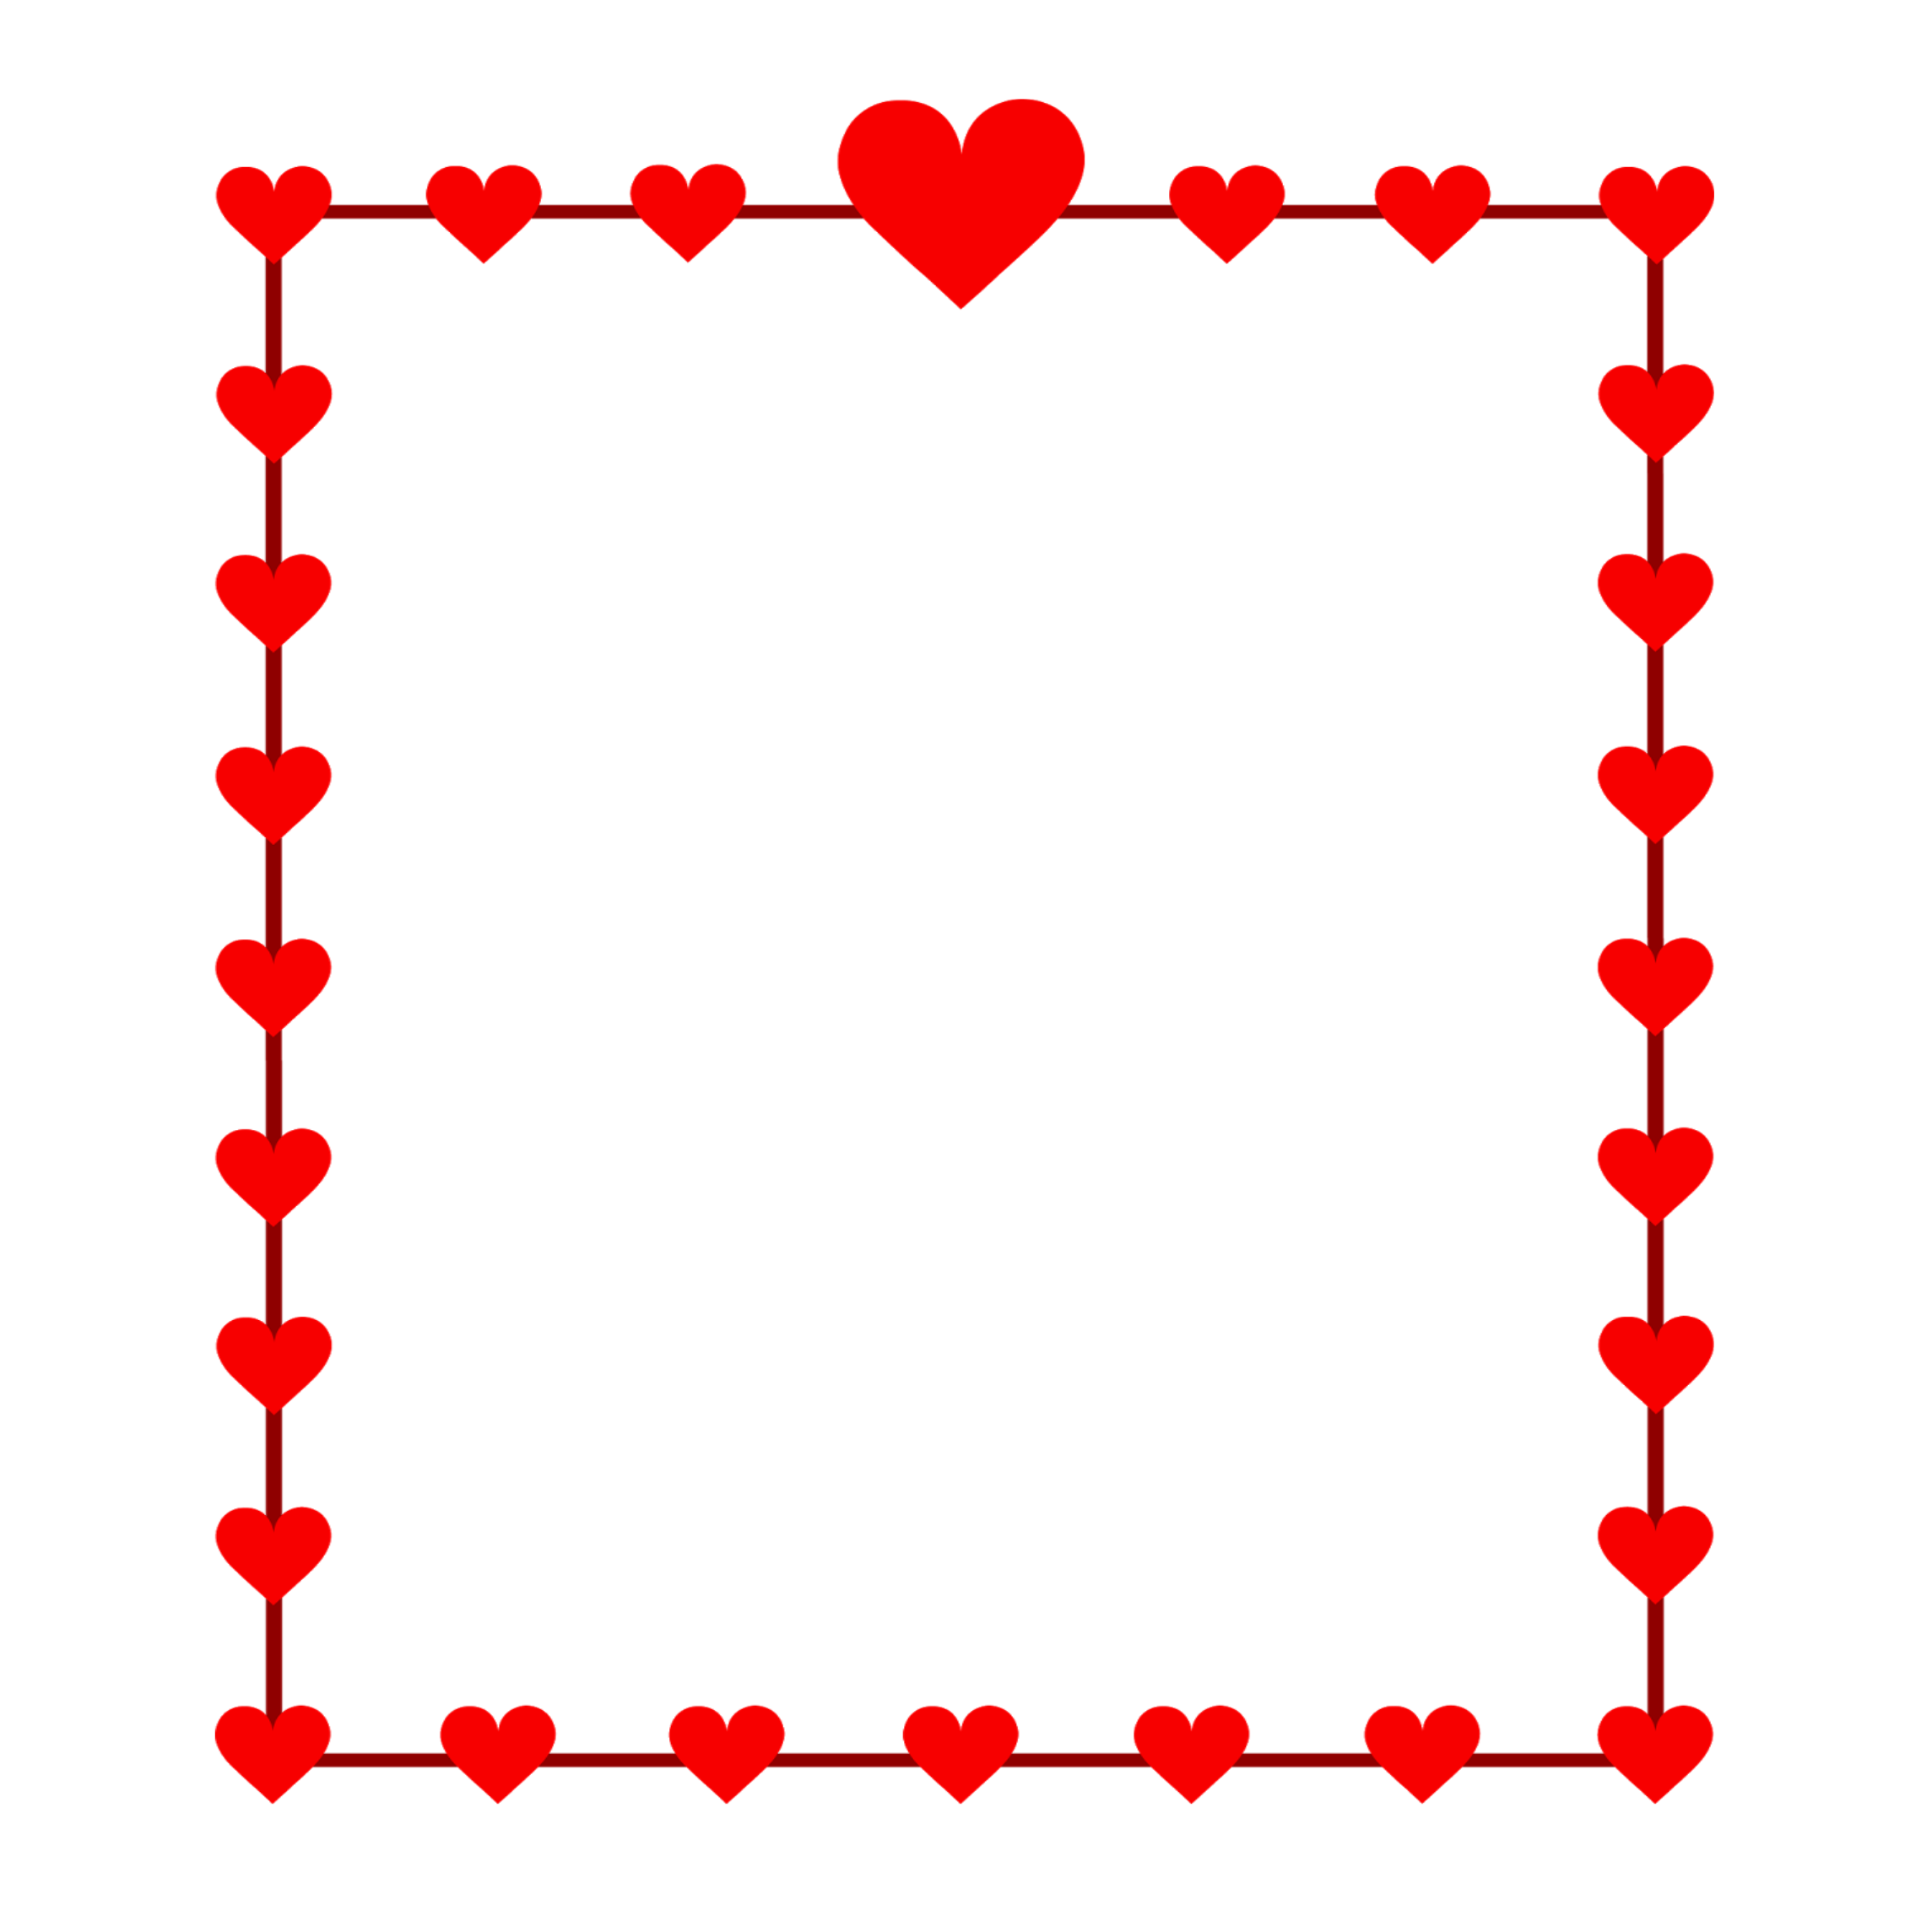 Clip art Borders and Frames Heart Openclipart Free content - red heart